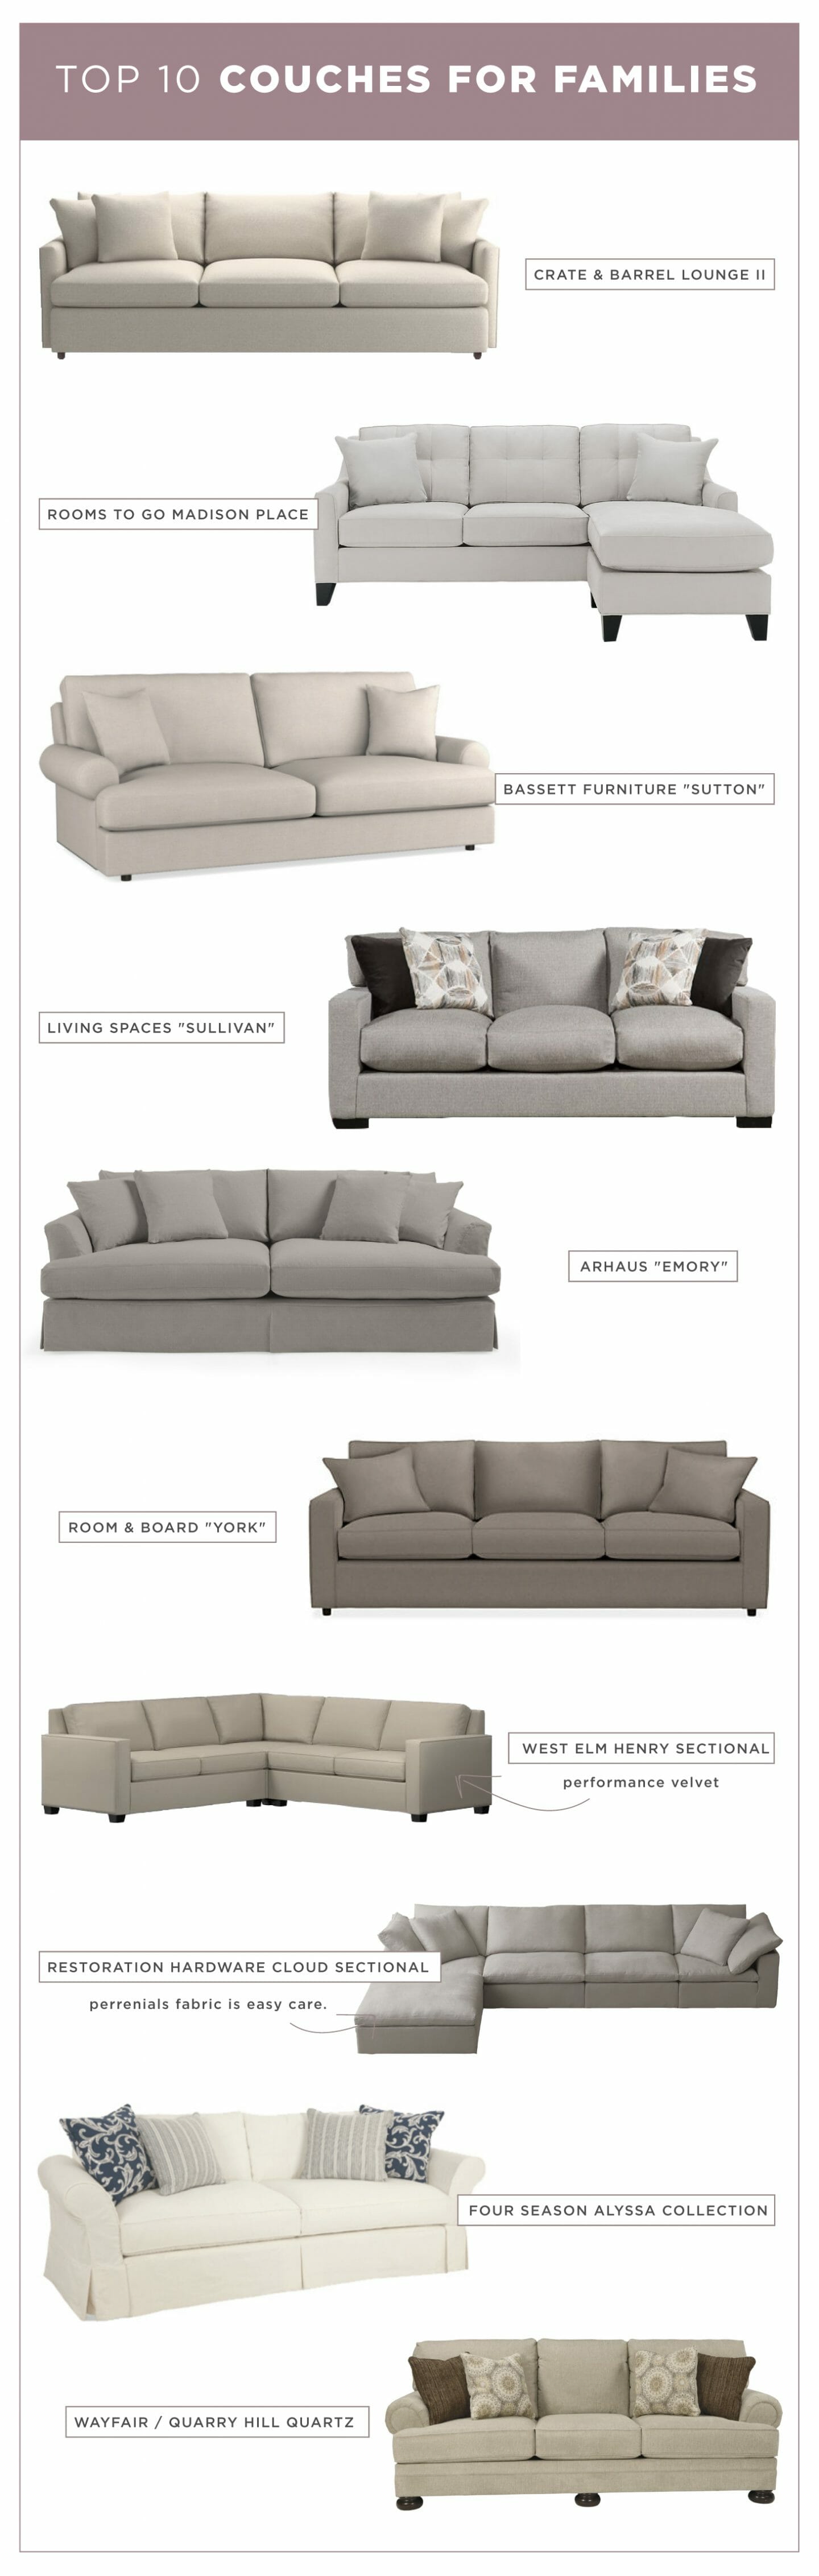 Most Recommended Couches for Families // The couches that are easy to clean, the most comfortable and will last years for your family!